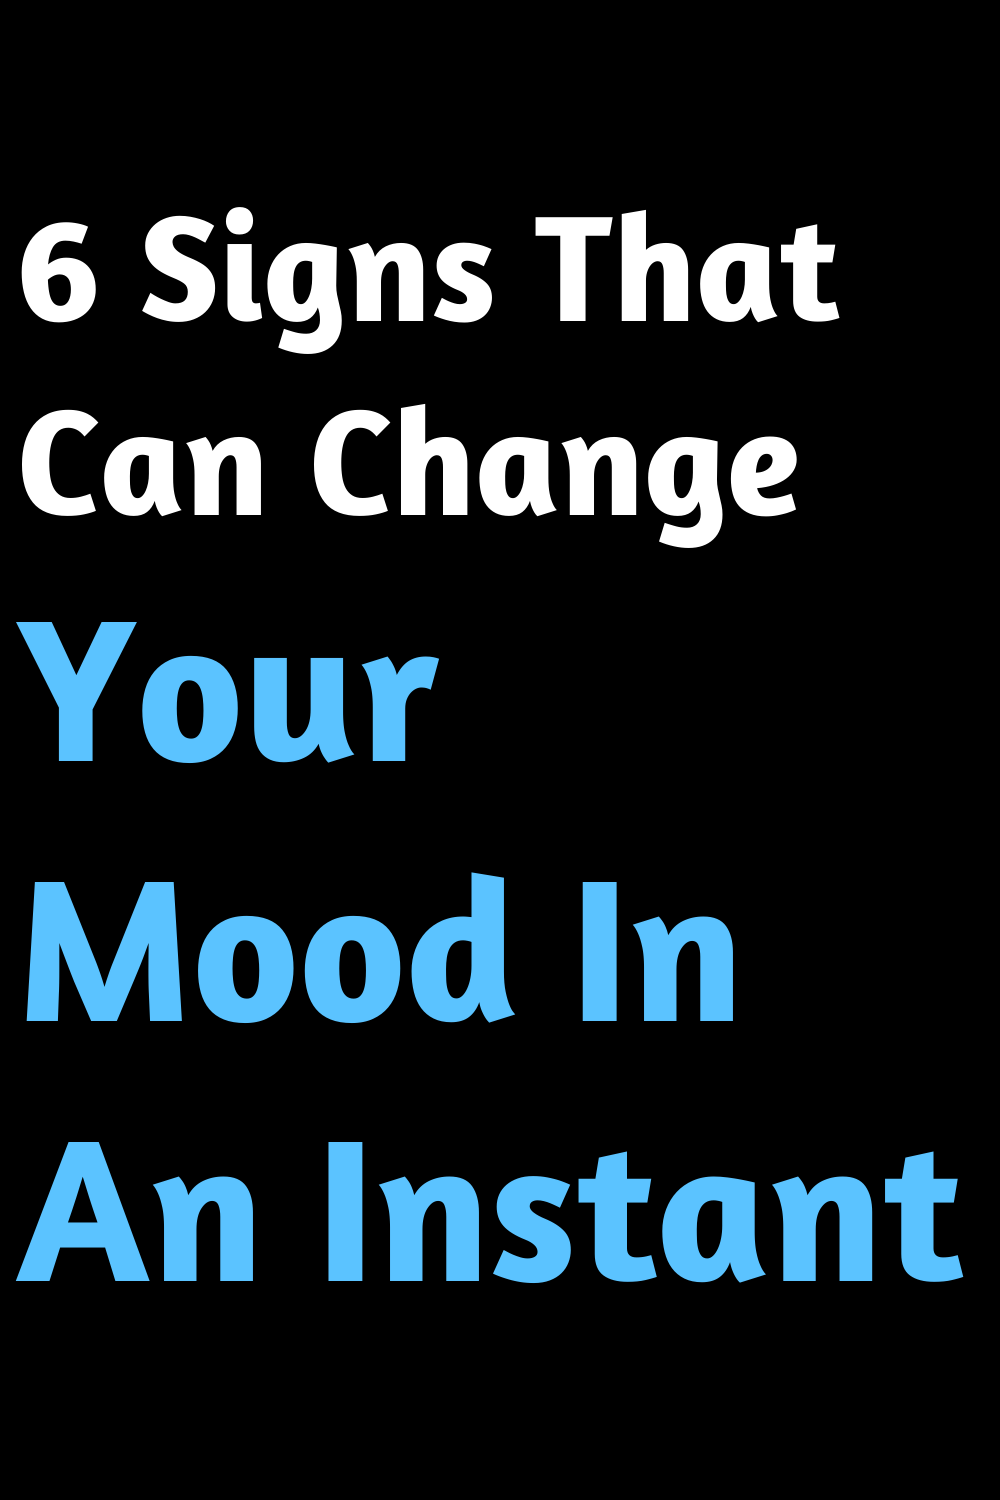 6 Signs That Can Change Your Mood In An Instant